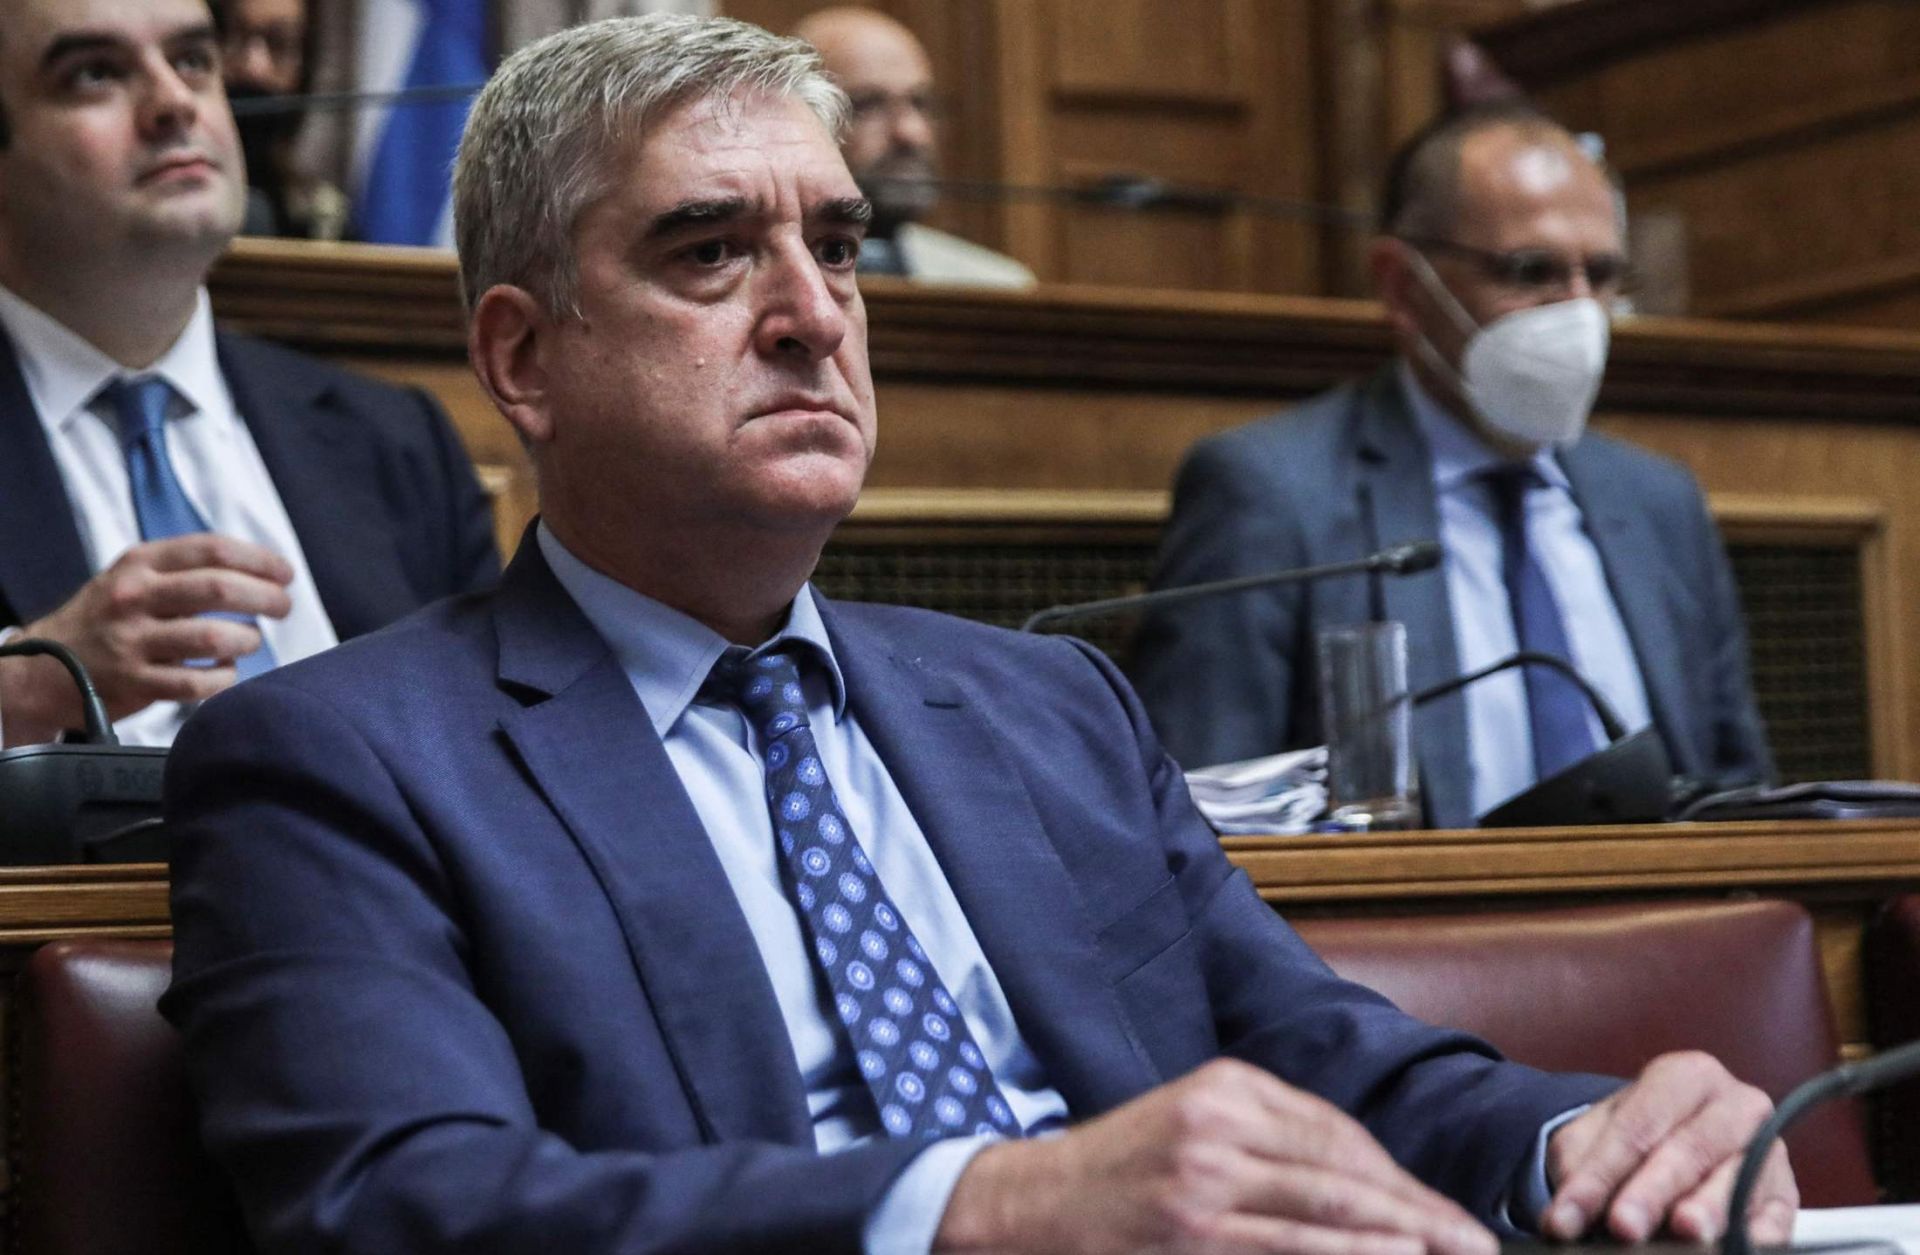 Greece's then-intelligence chief Panagiotis Kontoleon is seen in Athens on July 29, 2022. Several days later, Kontoleon resigned amid a scandal involving the alleged spying of an opposition politician.